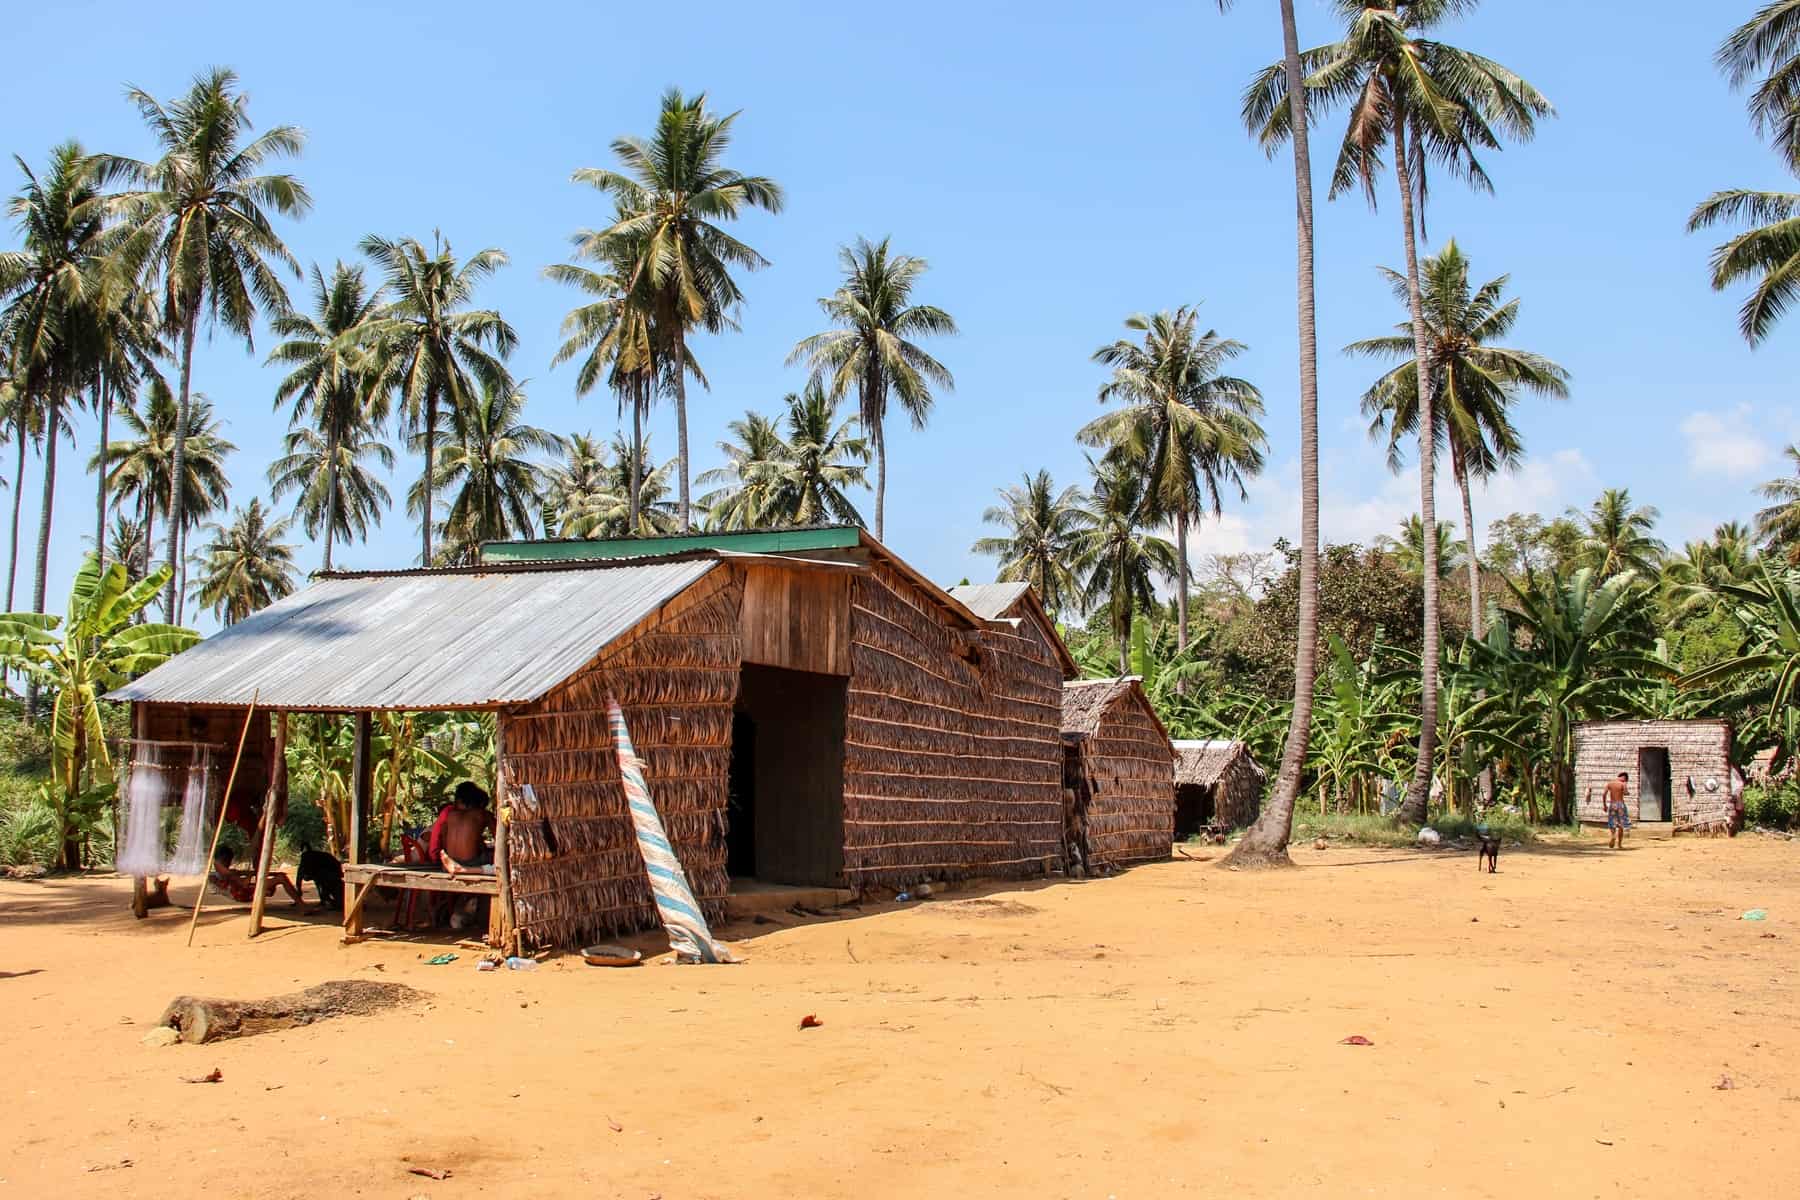 A large wooden hut and two smaller wooden huts mark the homes of local fisherman on the sandy coastline, backed by tall palm trees